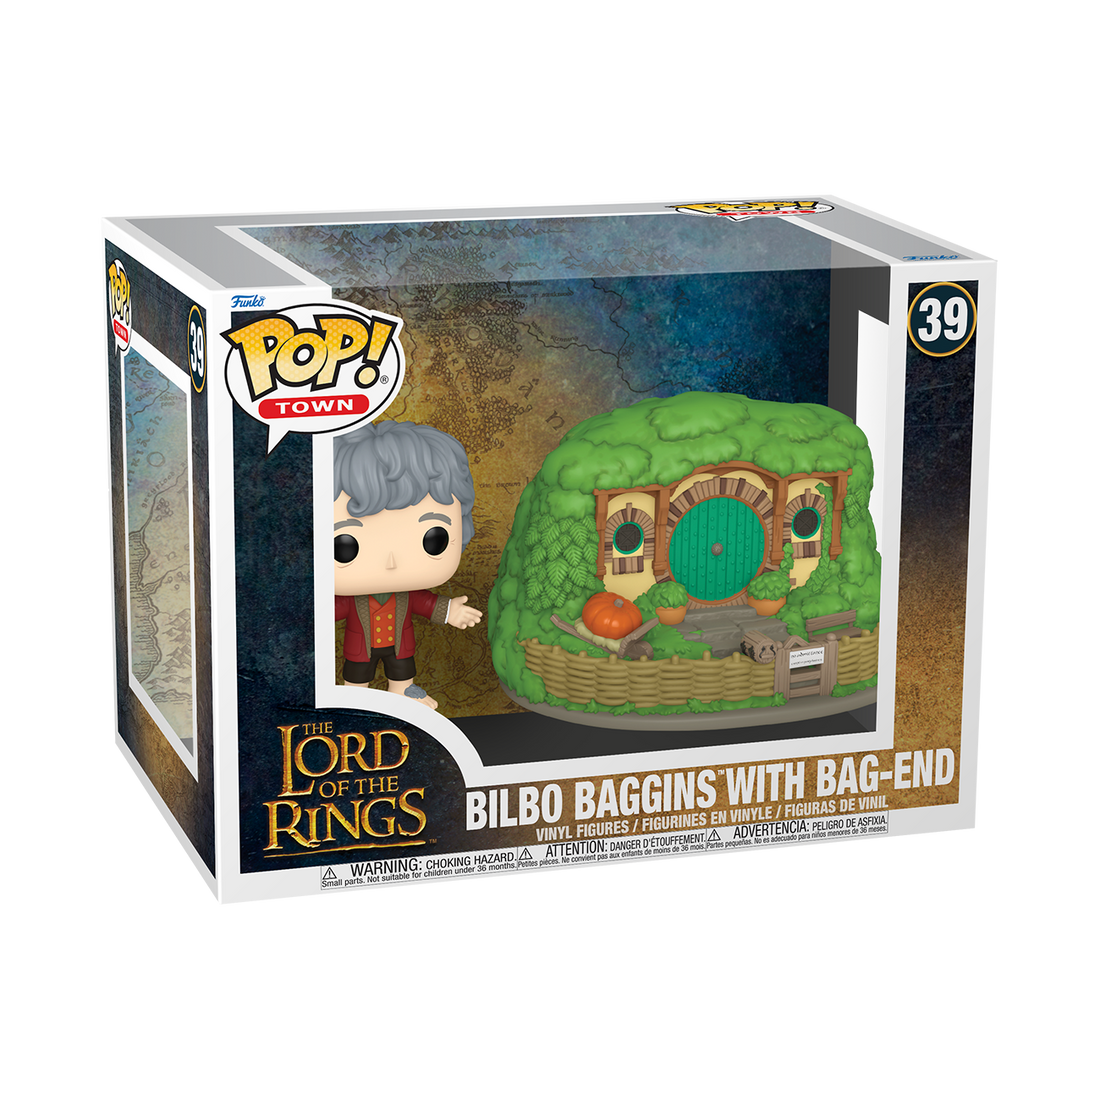 Funko Pop! Town Lord Of The Rings 39 Bilbo Baggins with Bag-End Funko